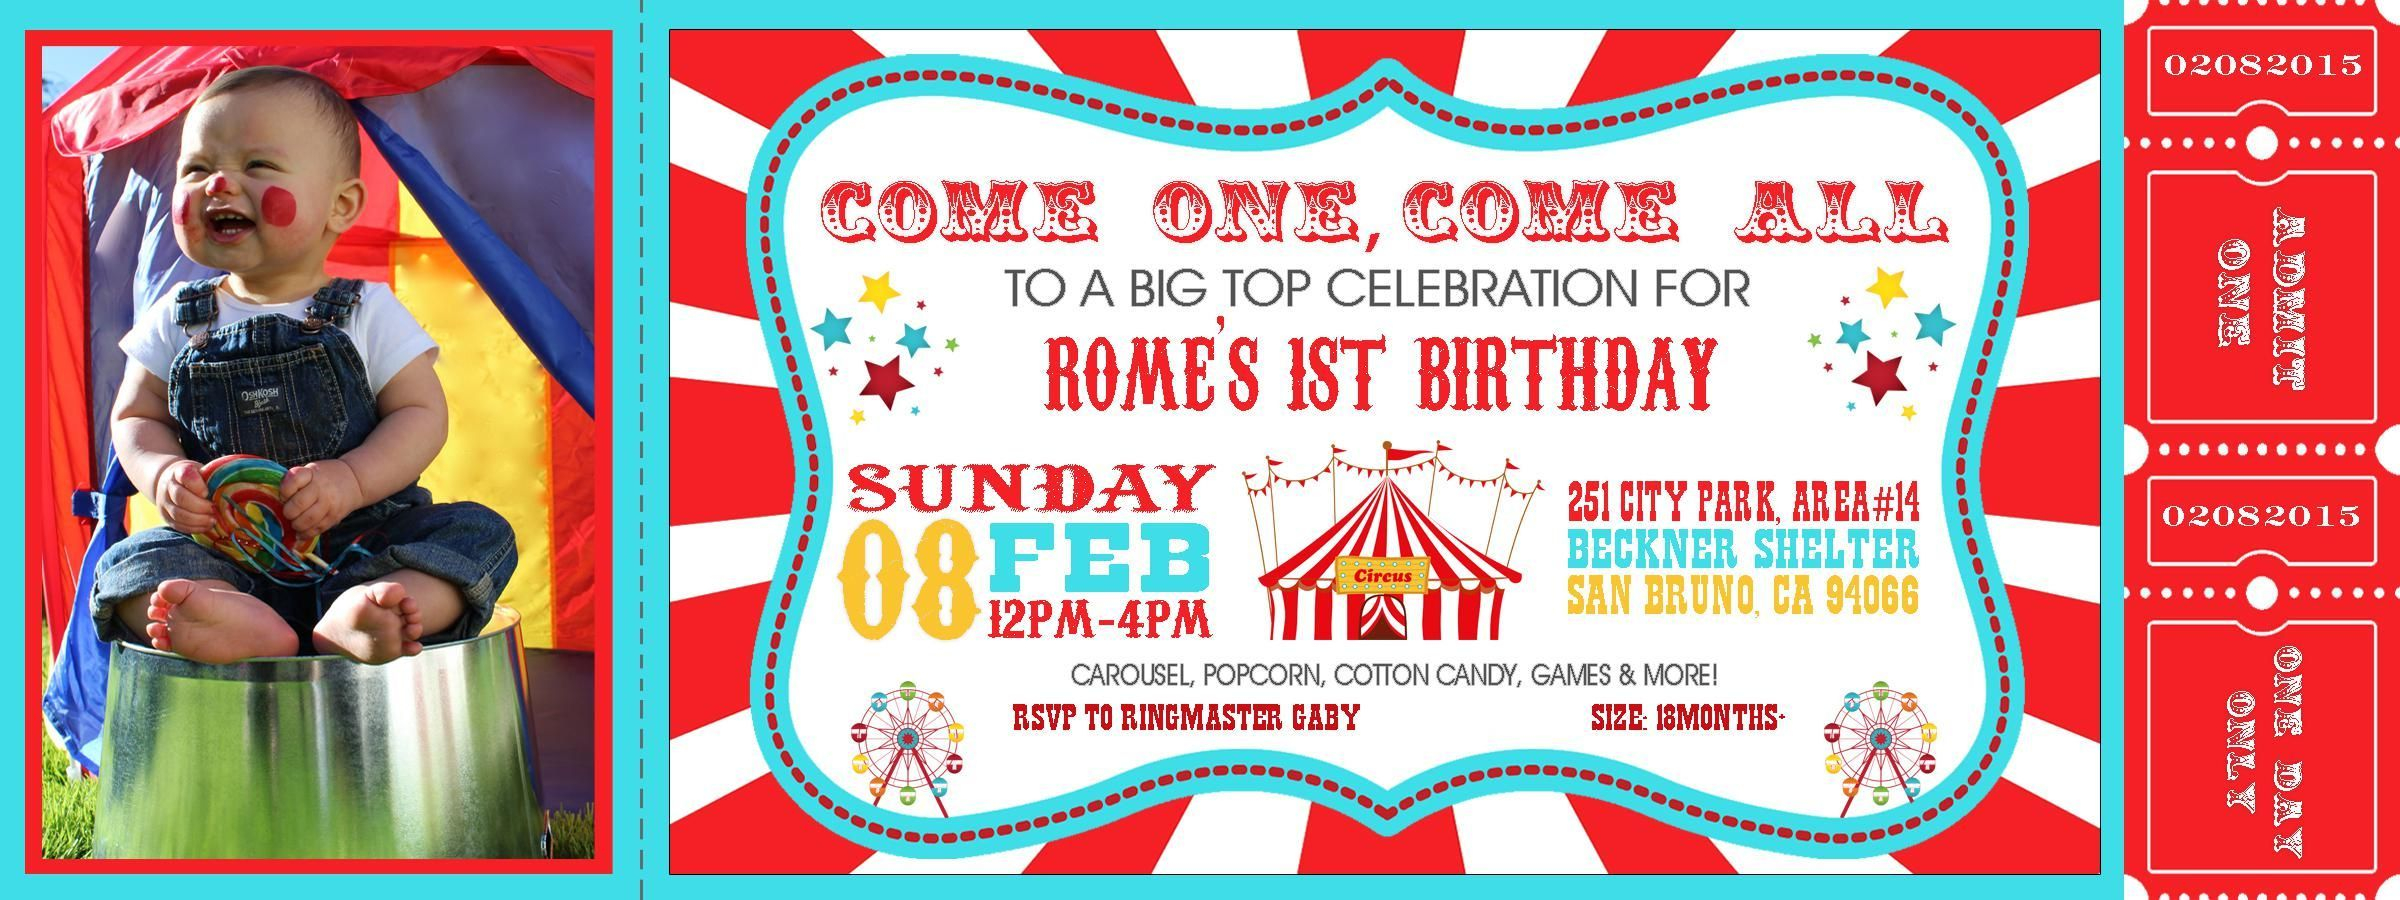 Fbaebcaadbc Perfect Carnival Theme Party Invitations Templates intended for sizing 2400 X 900